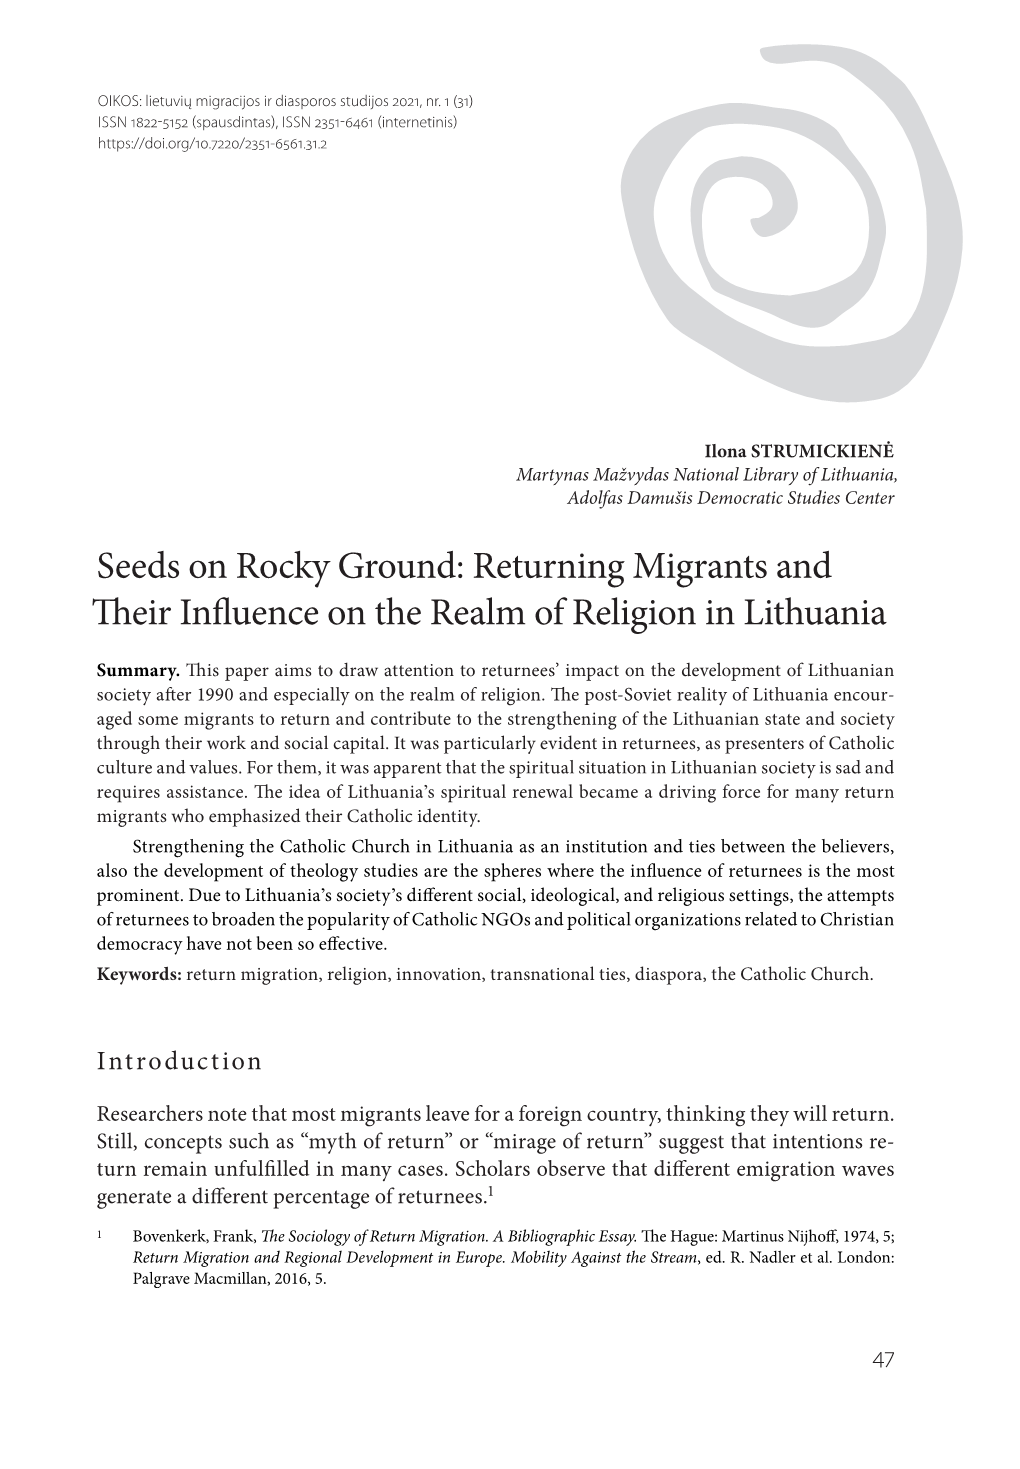 Returning Migrants and Their Influence on the Realm of Religion in Lithuania